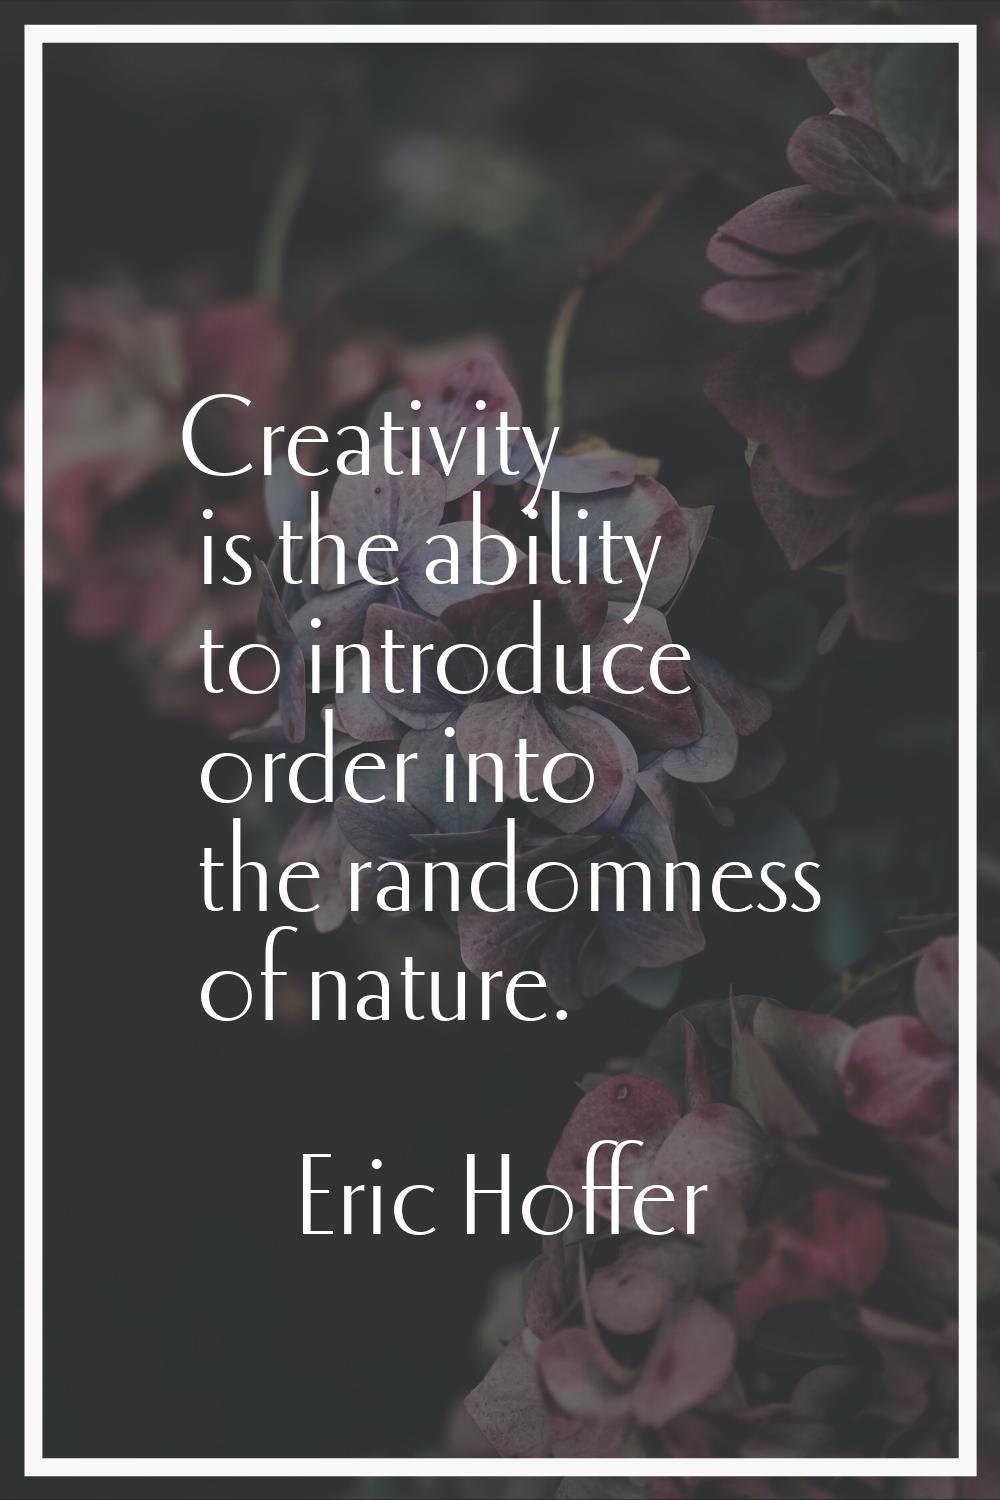 Creativity is the ability to introduce order into the randomness of nature.